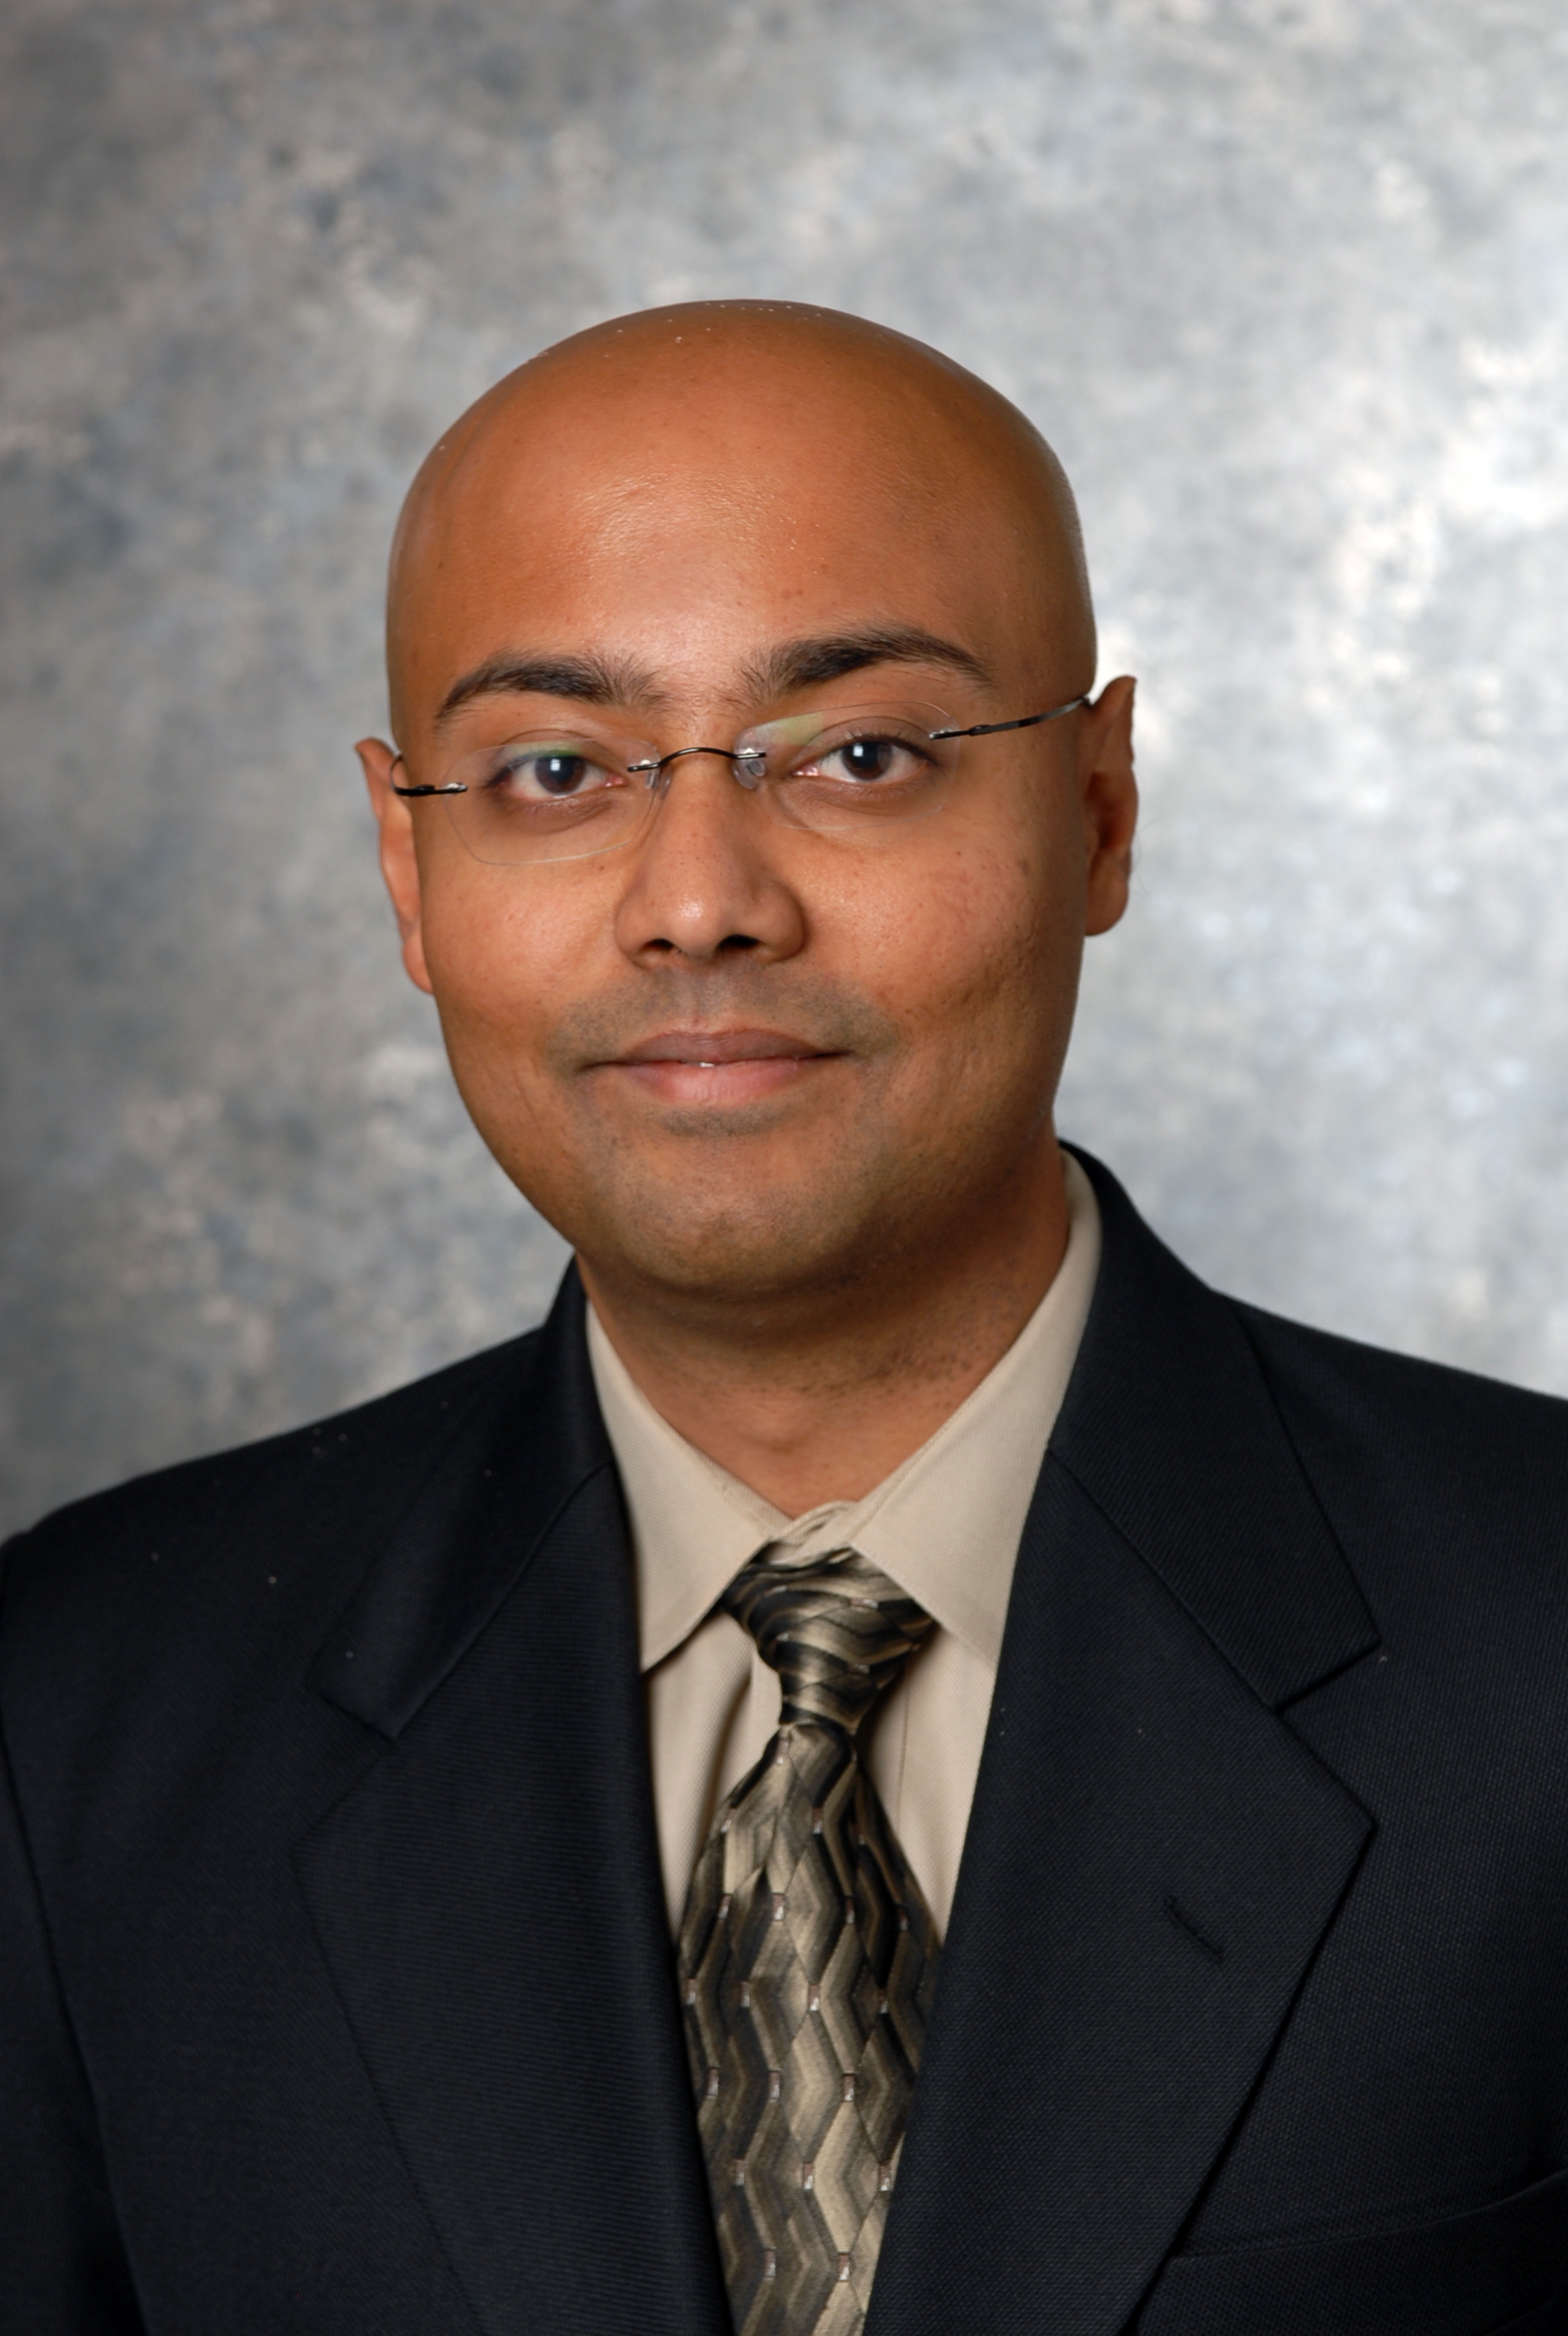 Kumar Venkataraman, James M. Collins Chair in Finance at SMU Cox School of Business joins the U.S. Securities and Exchange Commission's newly formed Fixed Income Market Structure Advisory Committee.